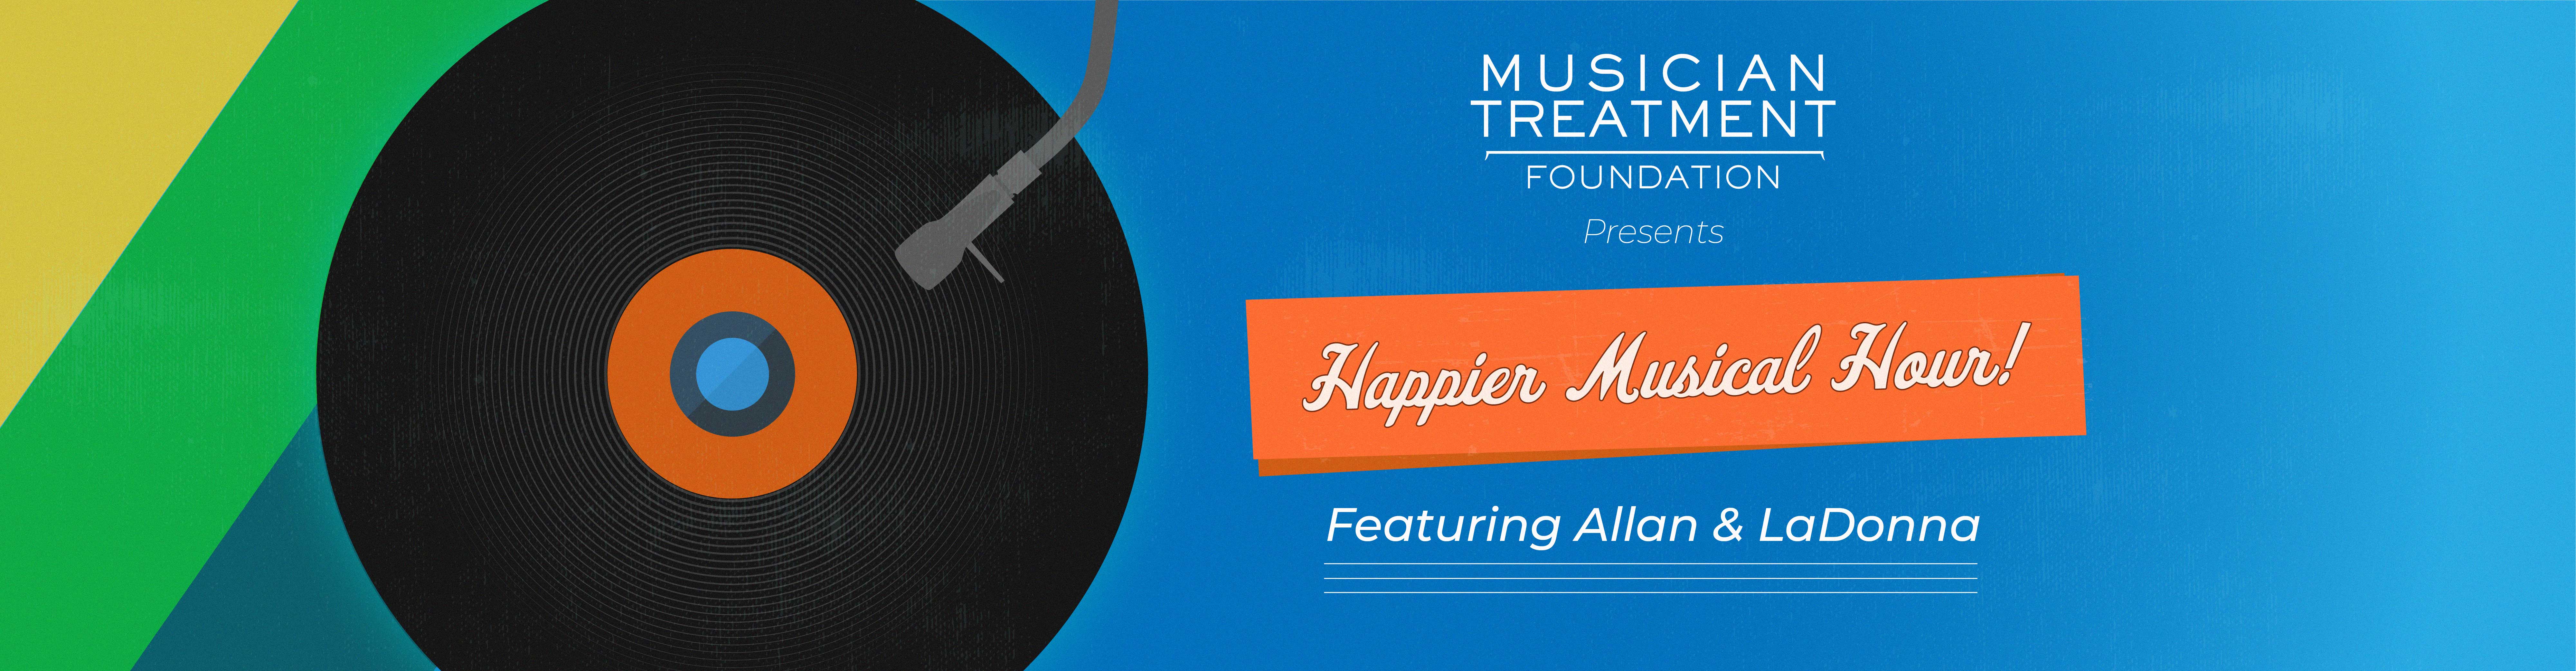 Happier Musical Hour Concert Featuring Allan Mayes, LaDonna, and Special Guest Elvis Costello